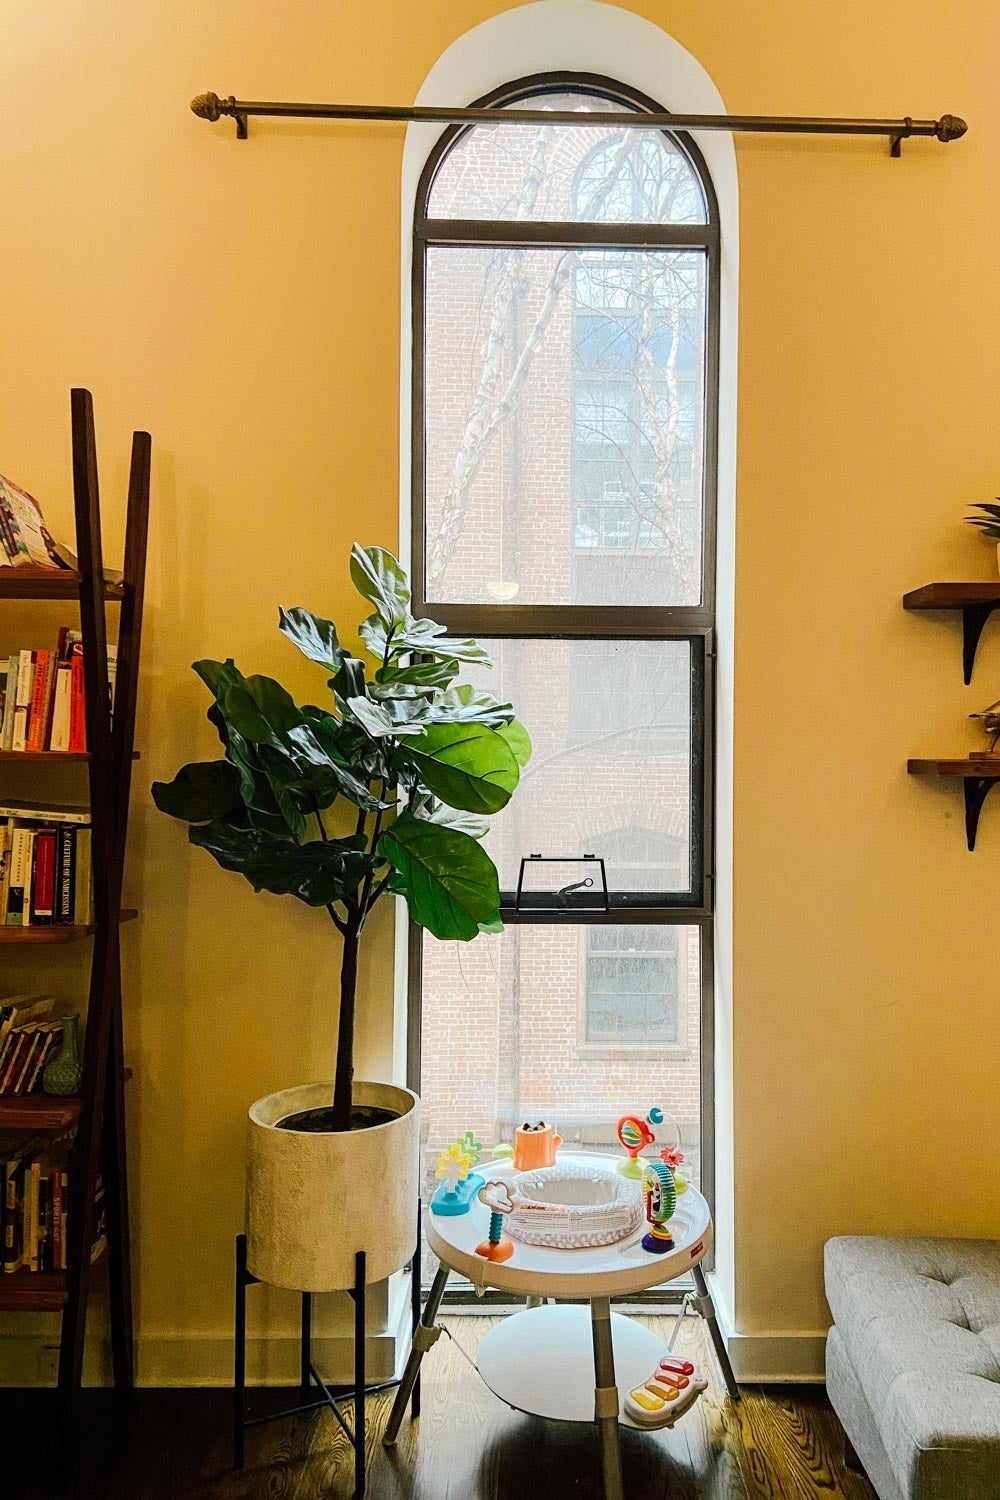 A window in a warm yellow room with a fig tree.